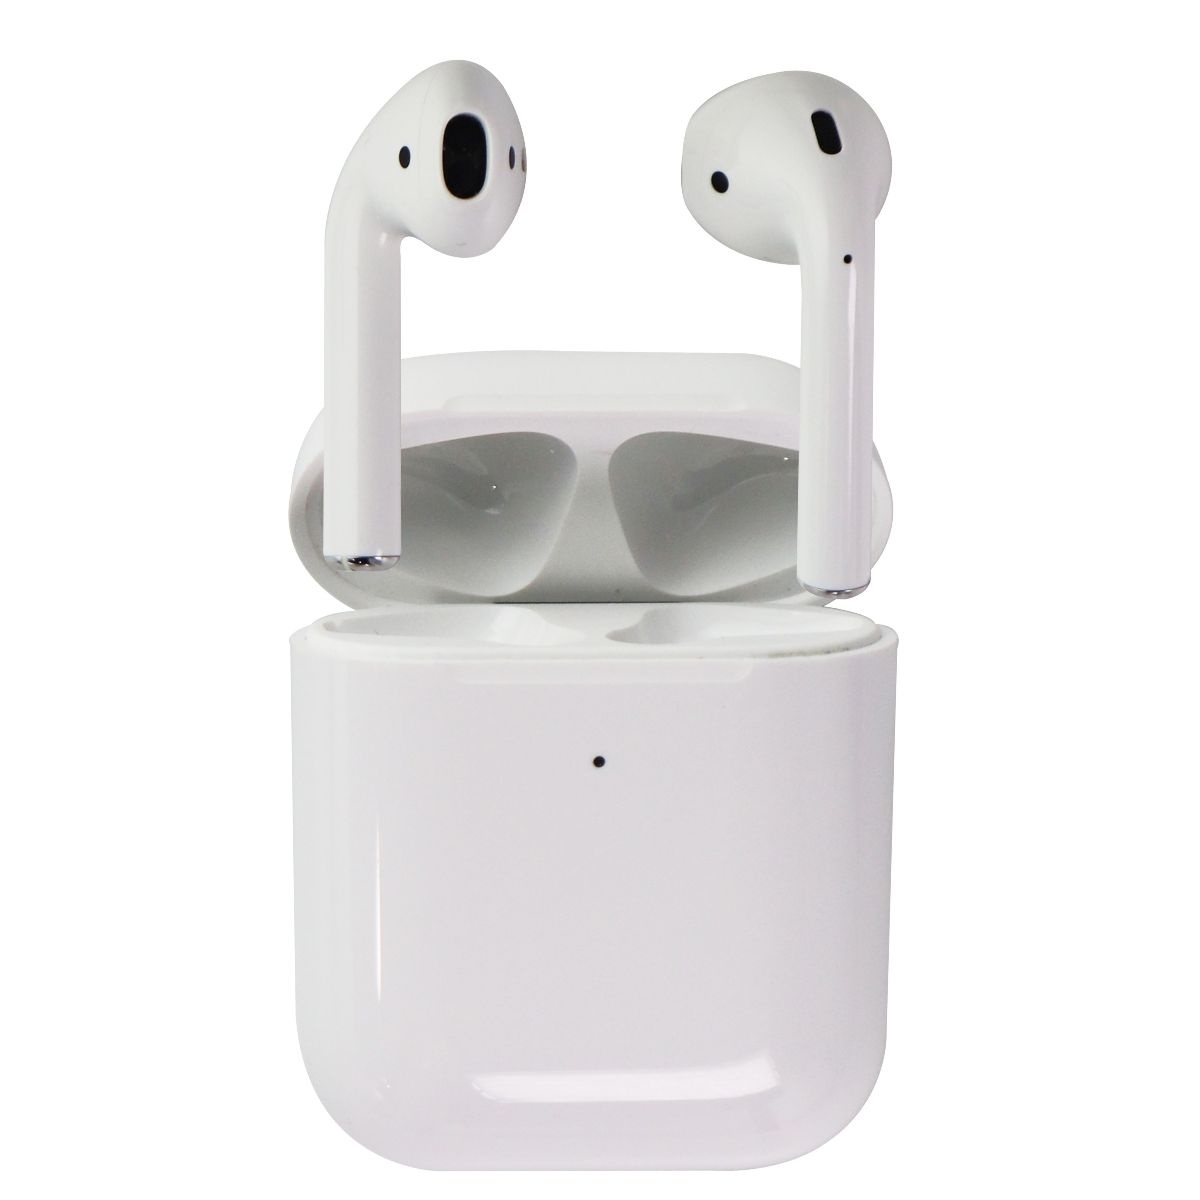 Apple AirPods with Wireless Charging Case - image 1 of 3